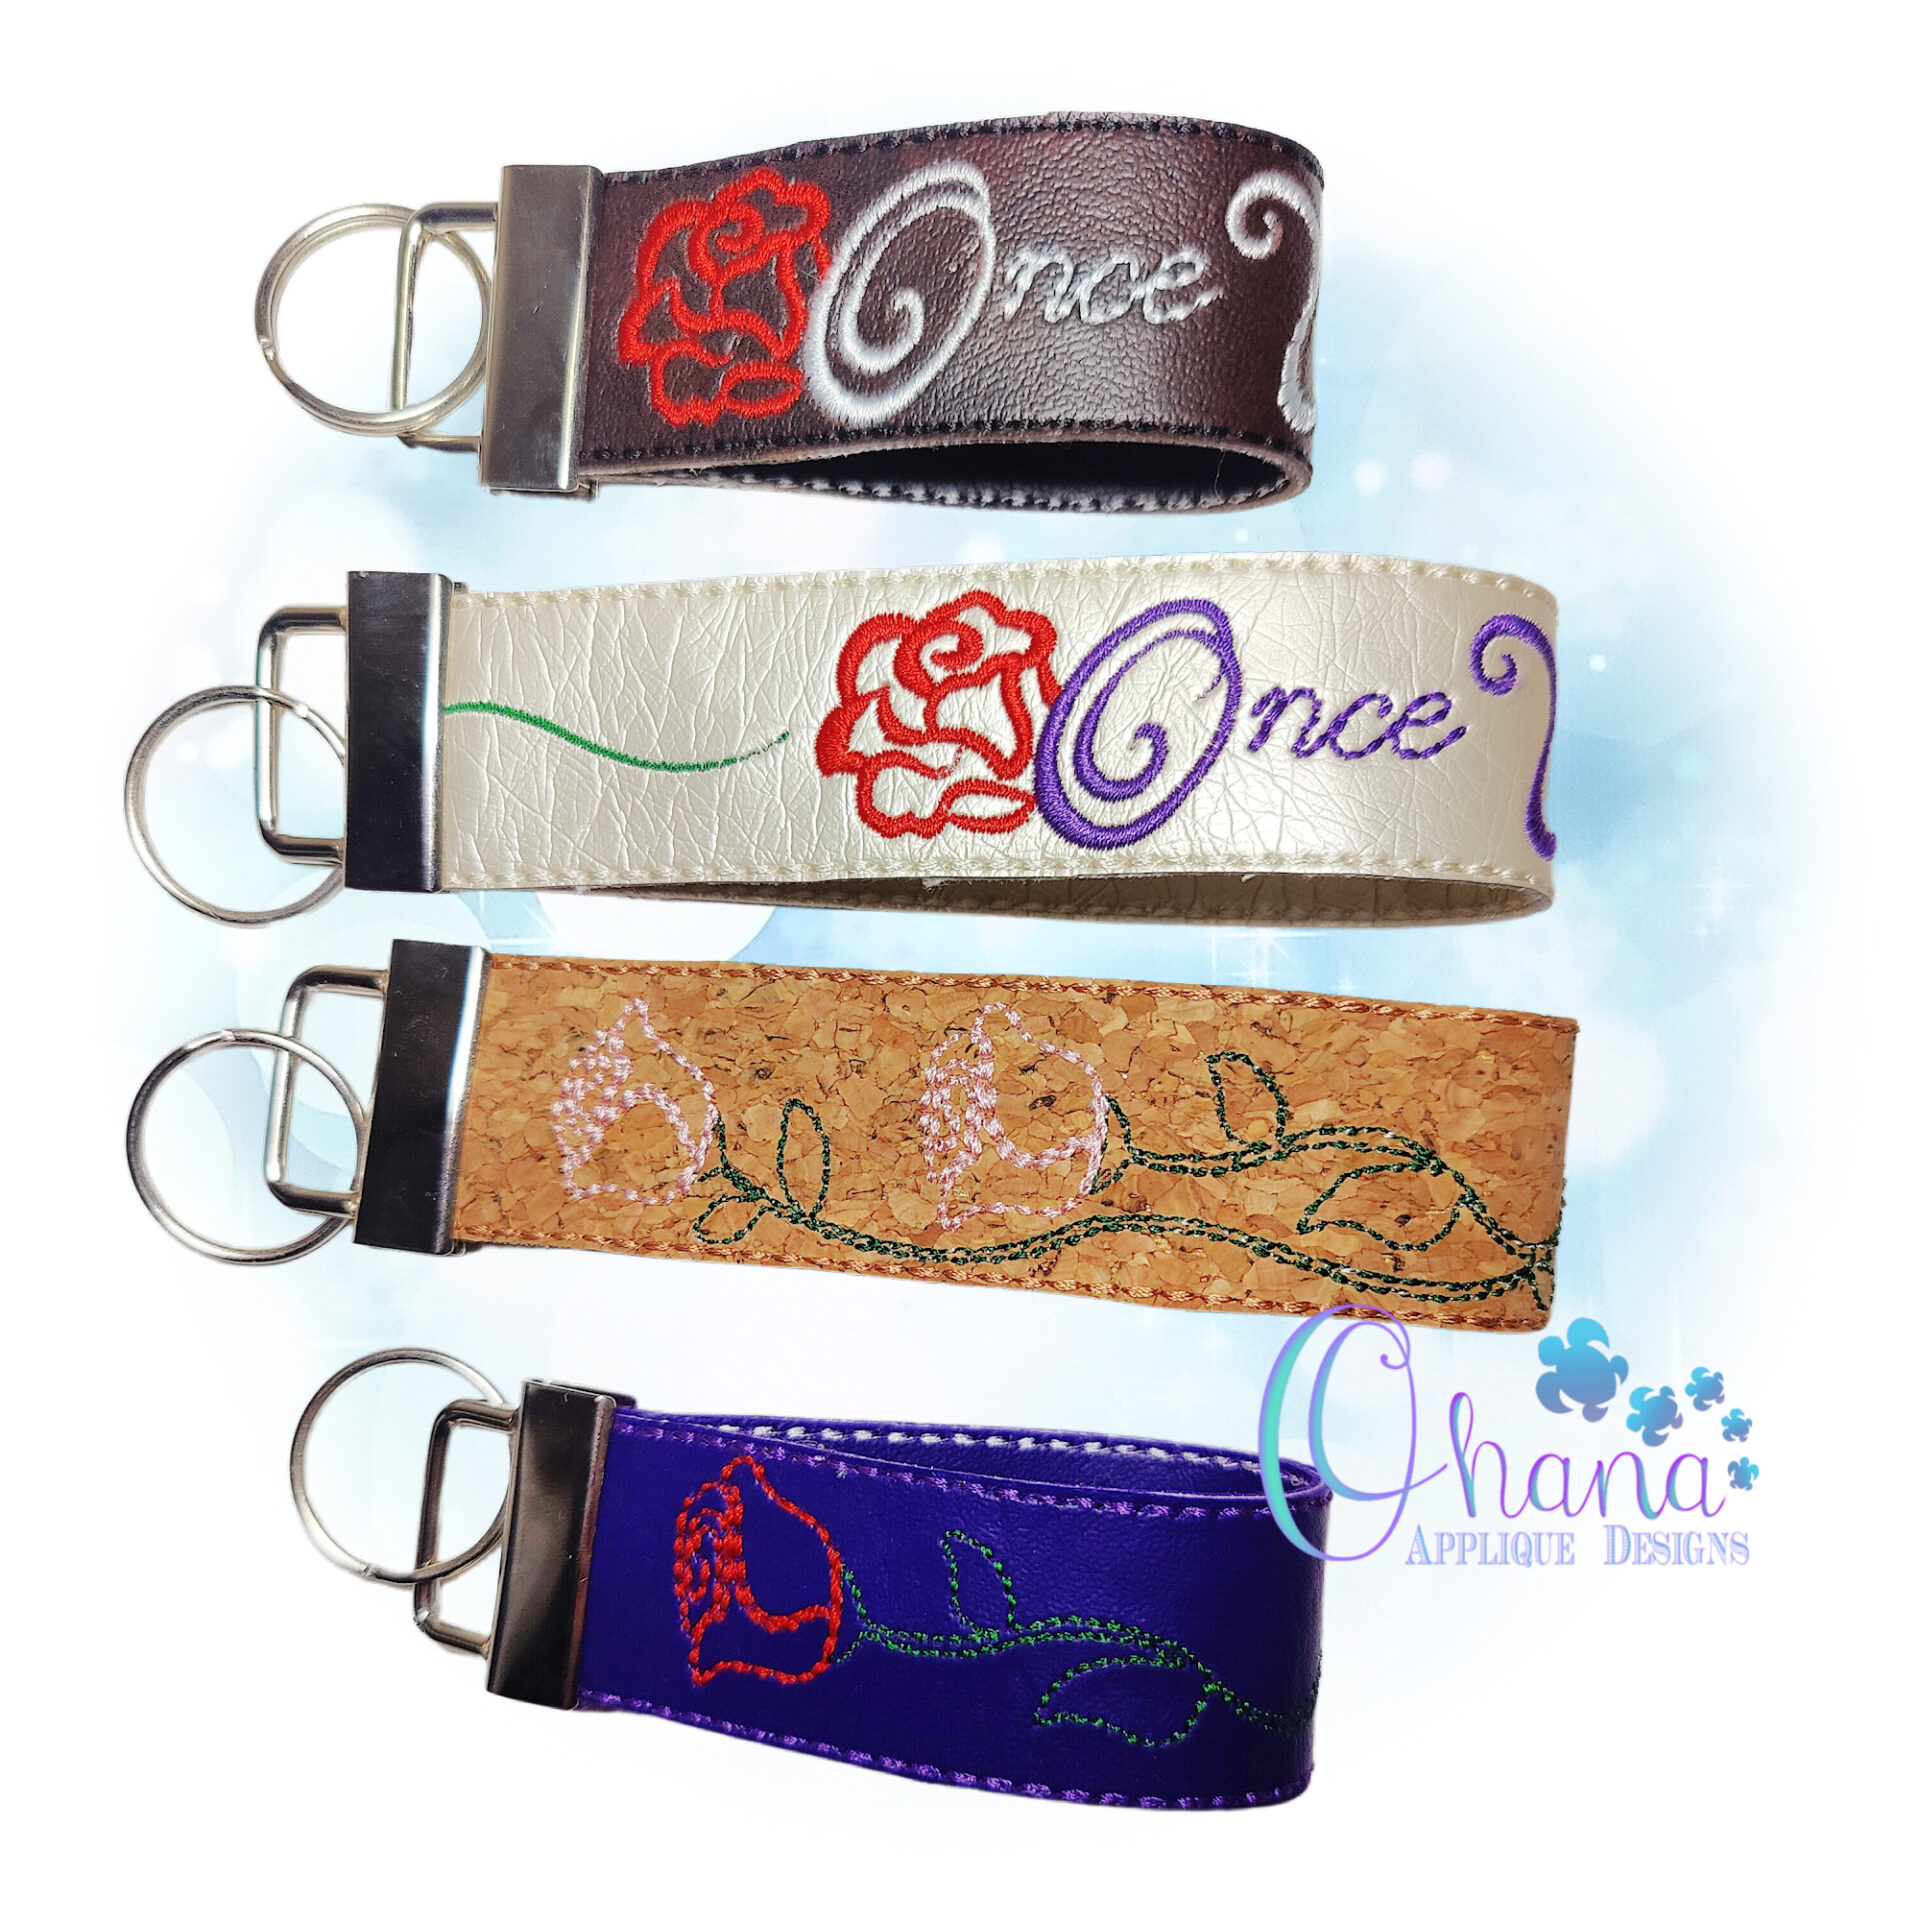 Once Upon a Time Wrist Strap